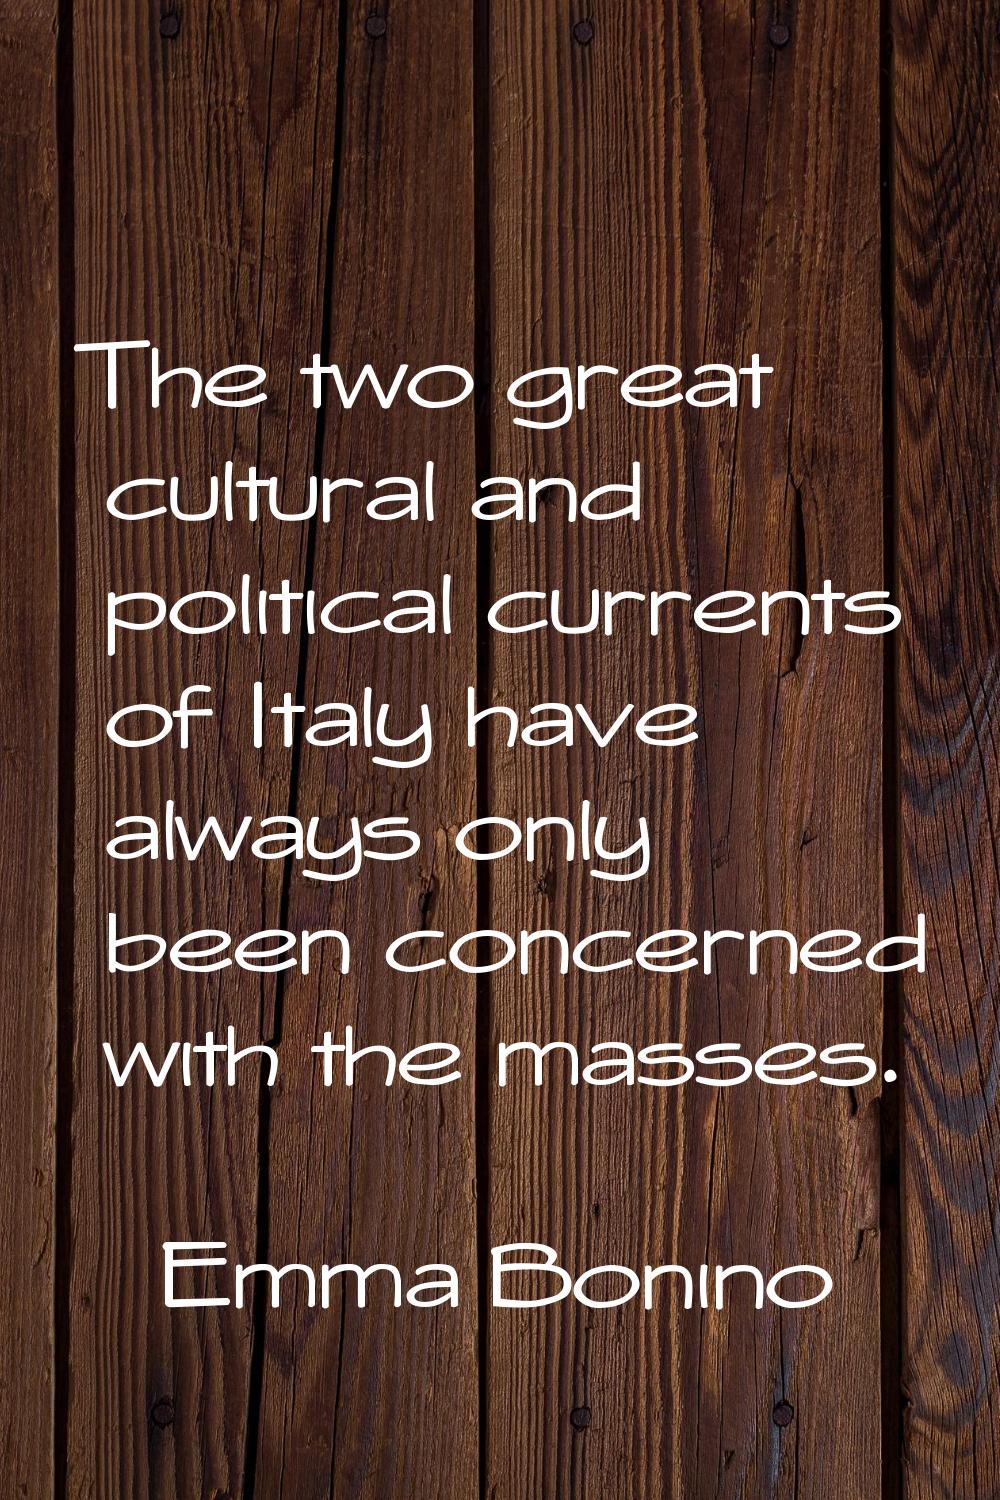 The two great cultural and political currents of Italy have always only been concerned with the mas